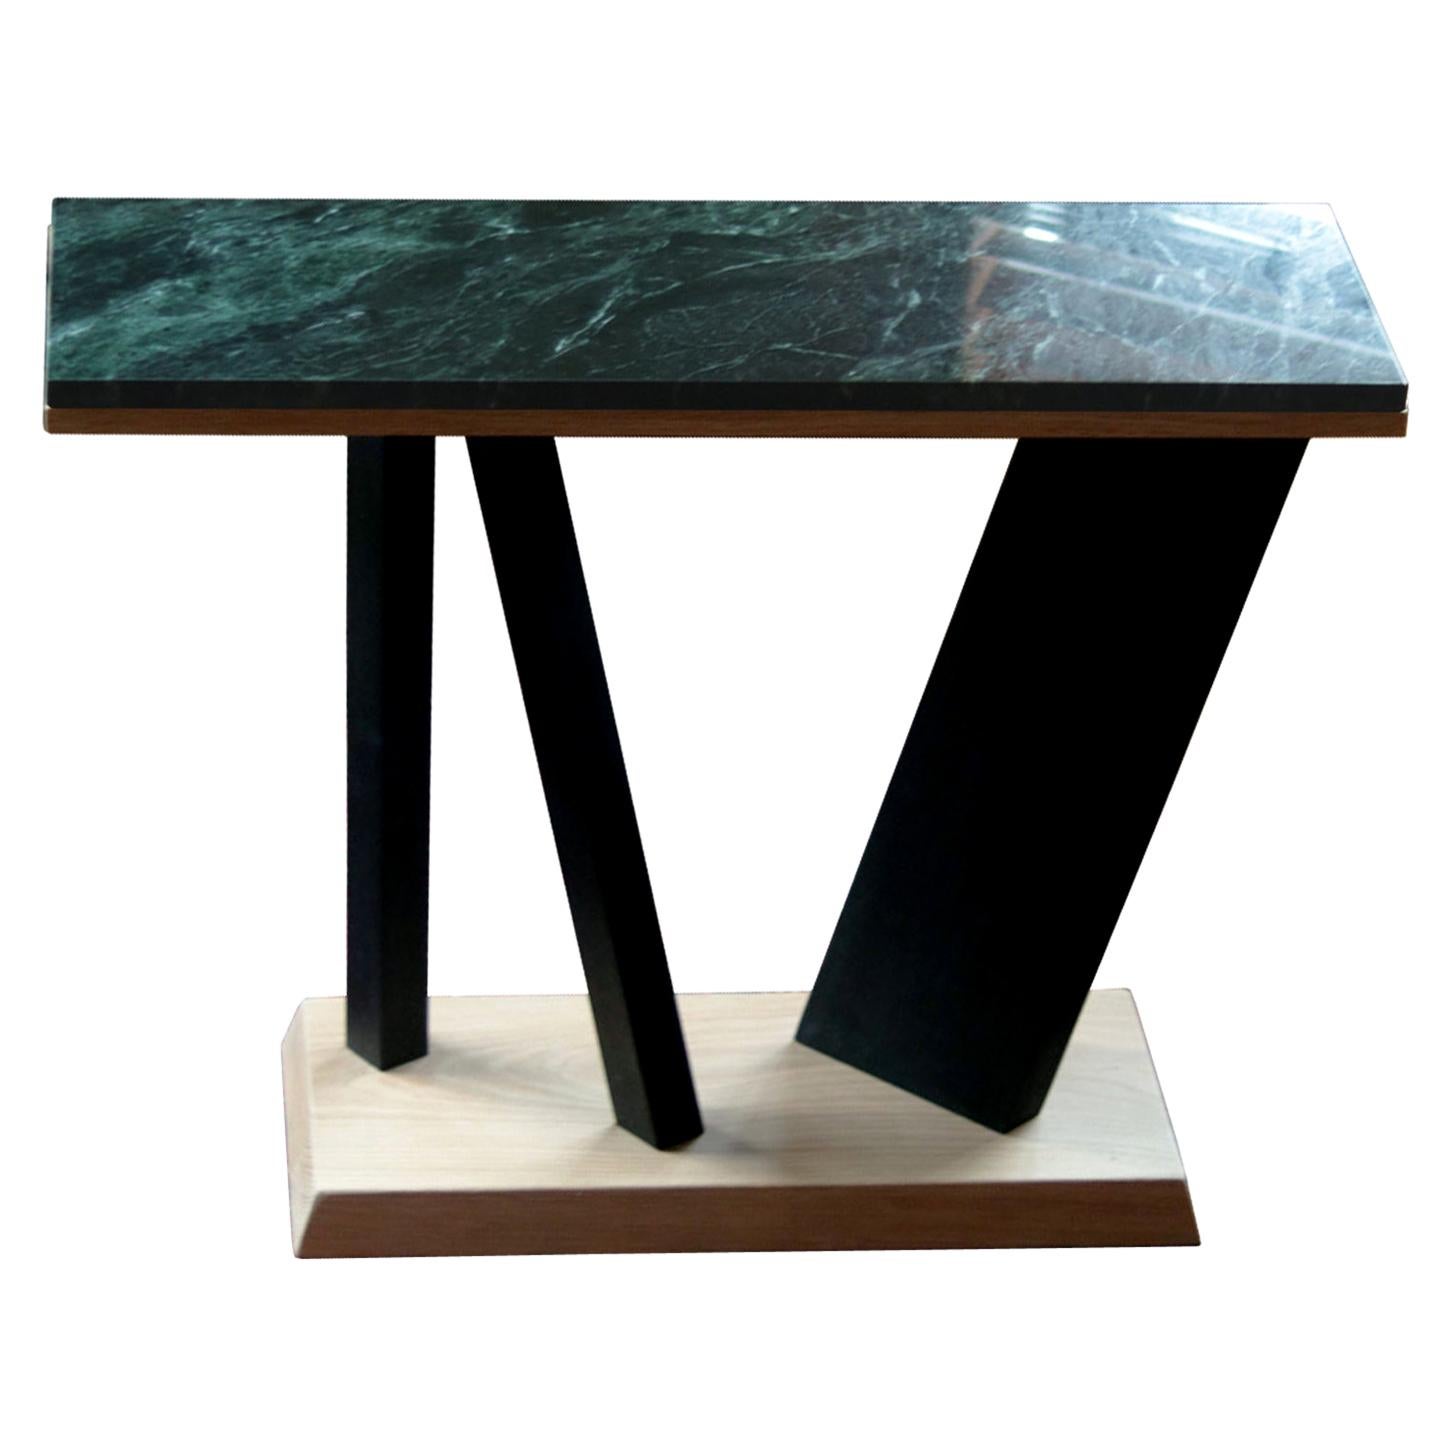 Montserrat White Oak And Emerald Green Marble Console Table